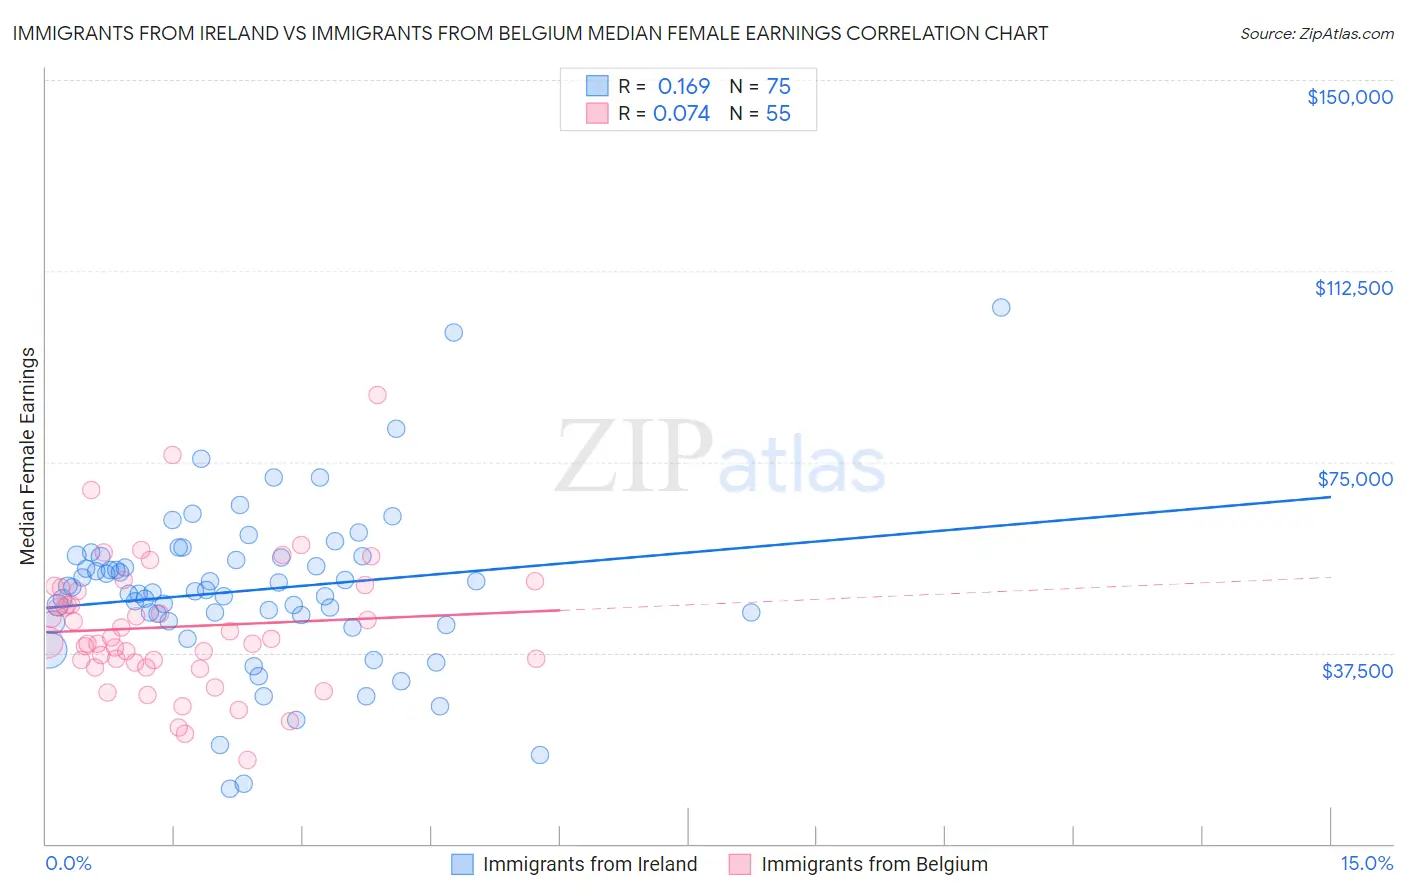 Immigrants from Ireland vs Immigrants from Belgium Median Female Earnings